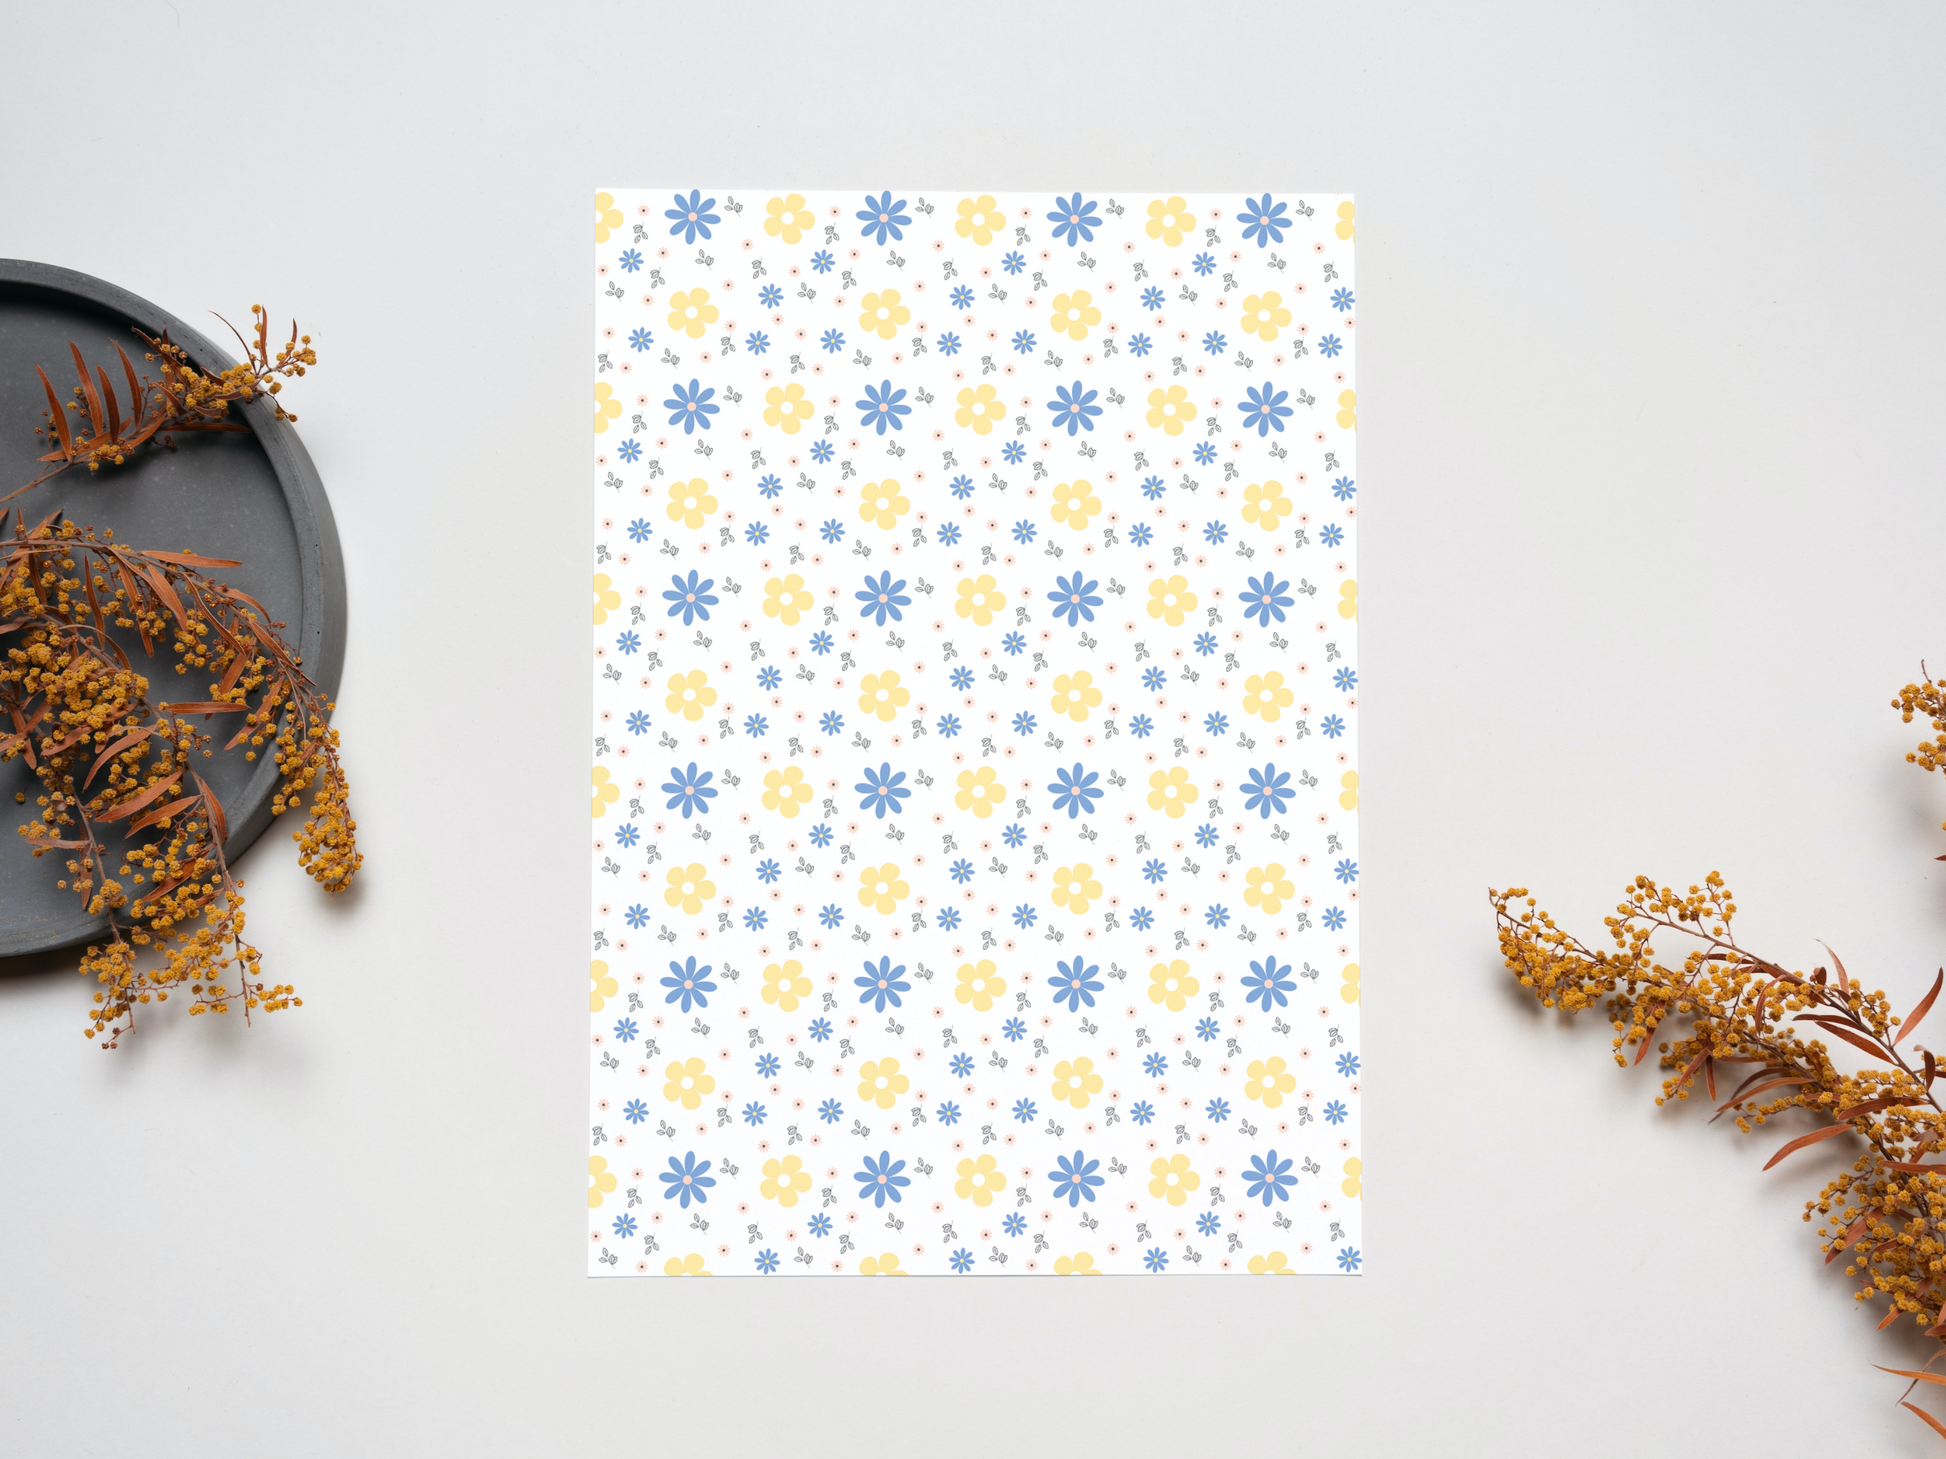 Blue and yellow flowers dollhouse wallpaper on a table near dry leaves